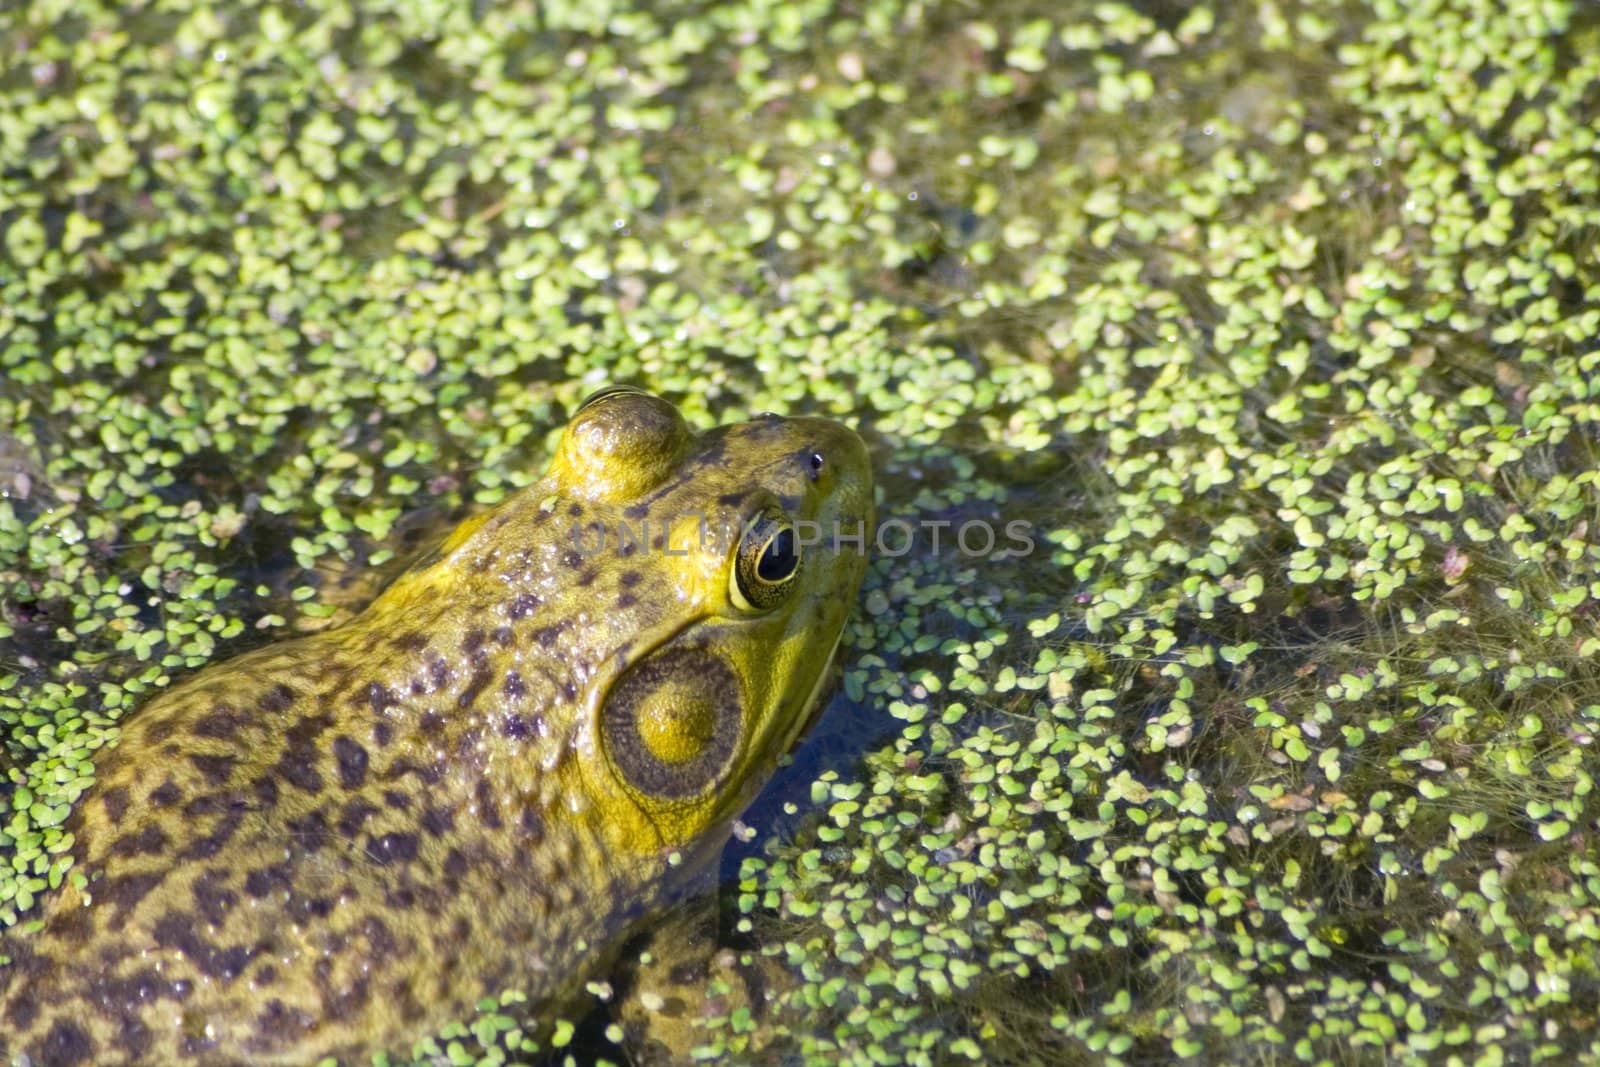 A frog trying to hide on the surface of a pond